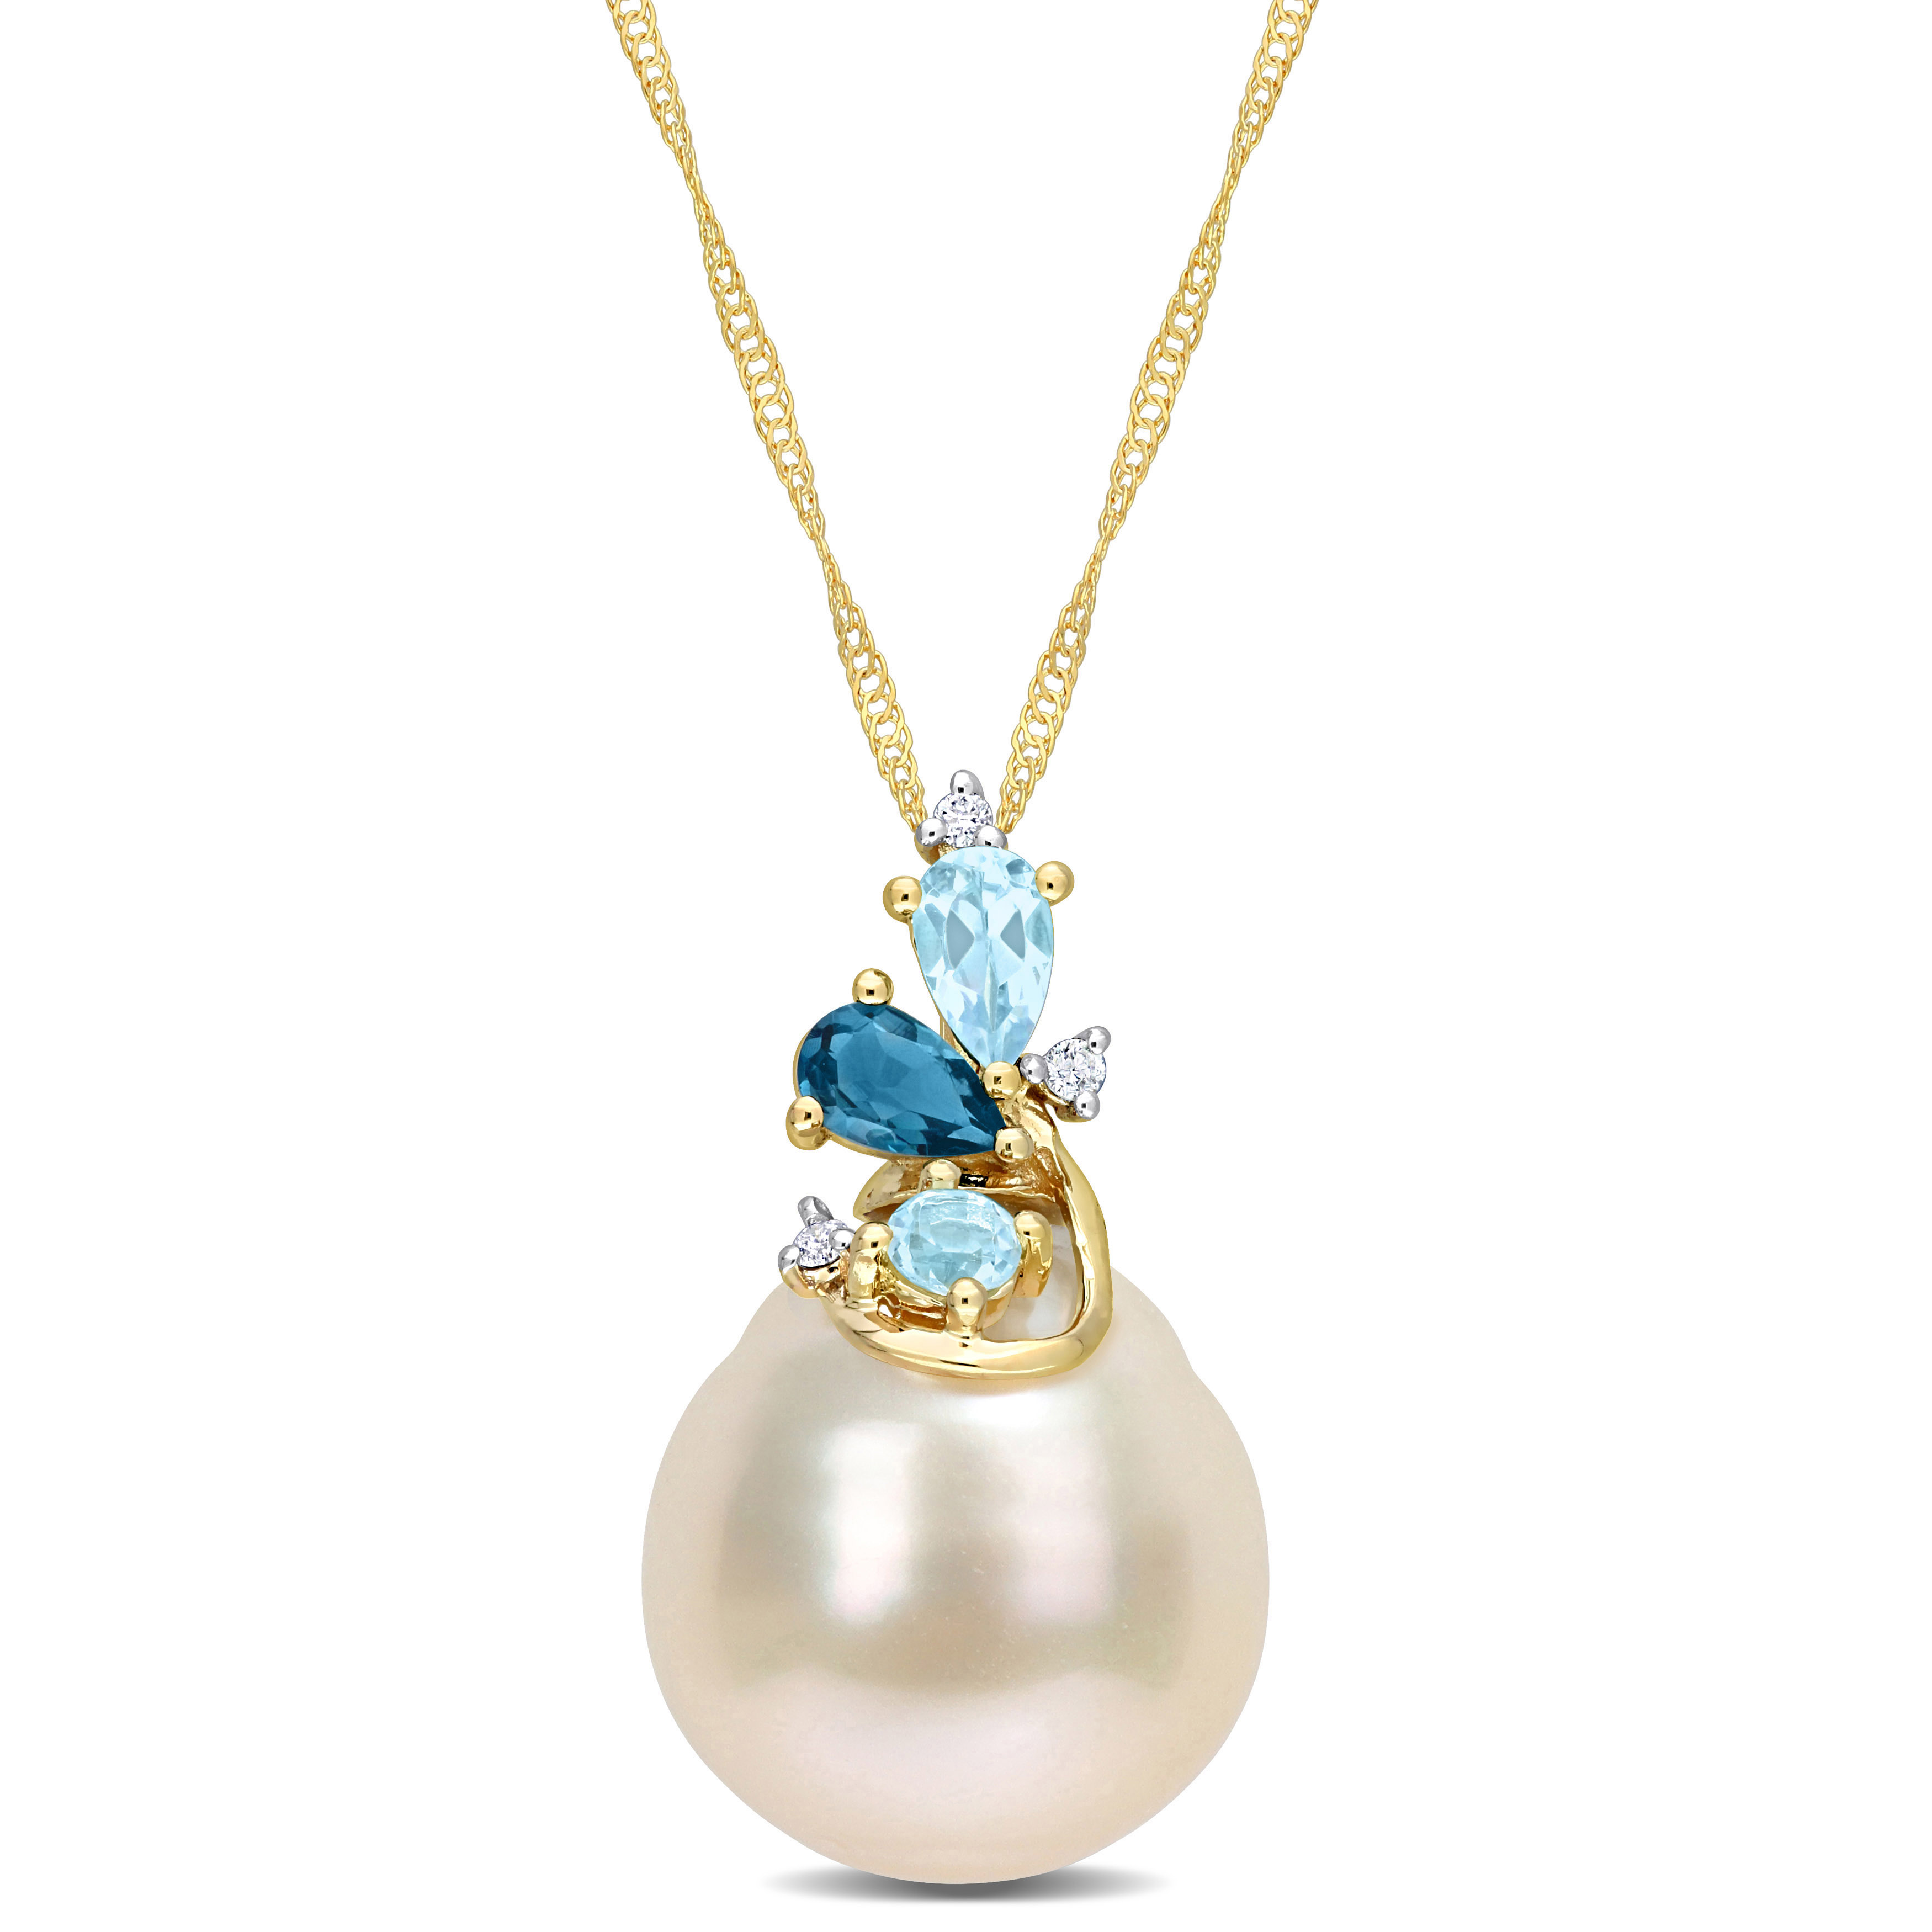 12 - 13 MM South Sea Cultured Pearl 5/8 CT TGW Sky & London Blue Topaz and Diamond Accent Cluster Pendant with Chain in 14k Yellow Gold